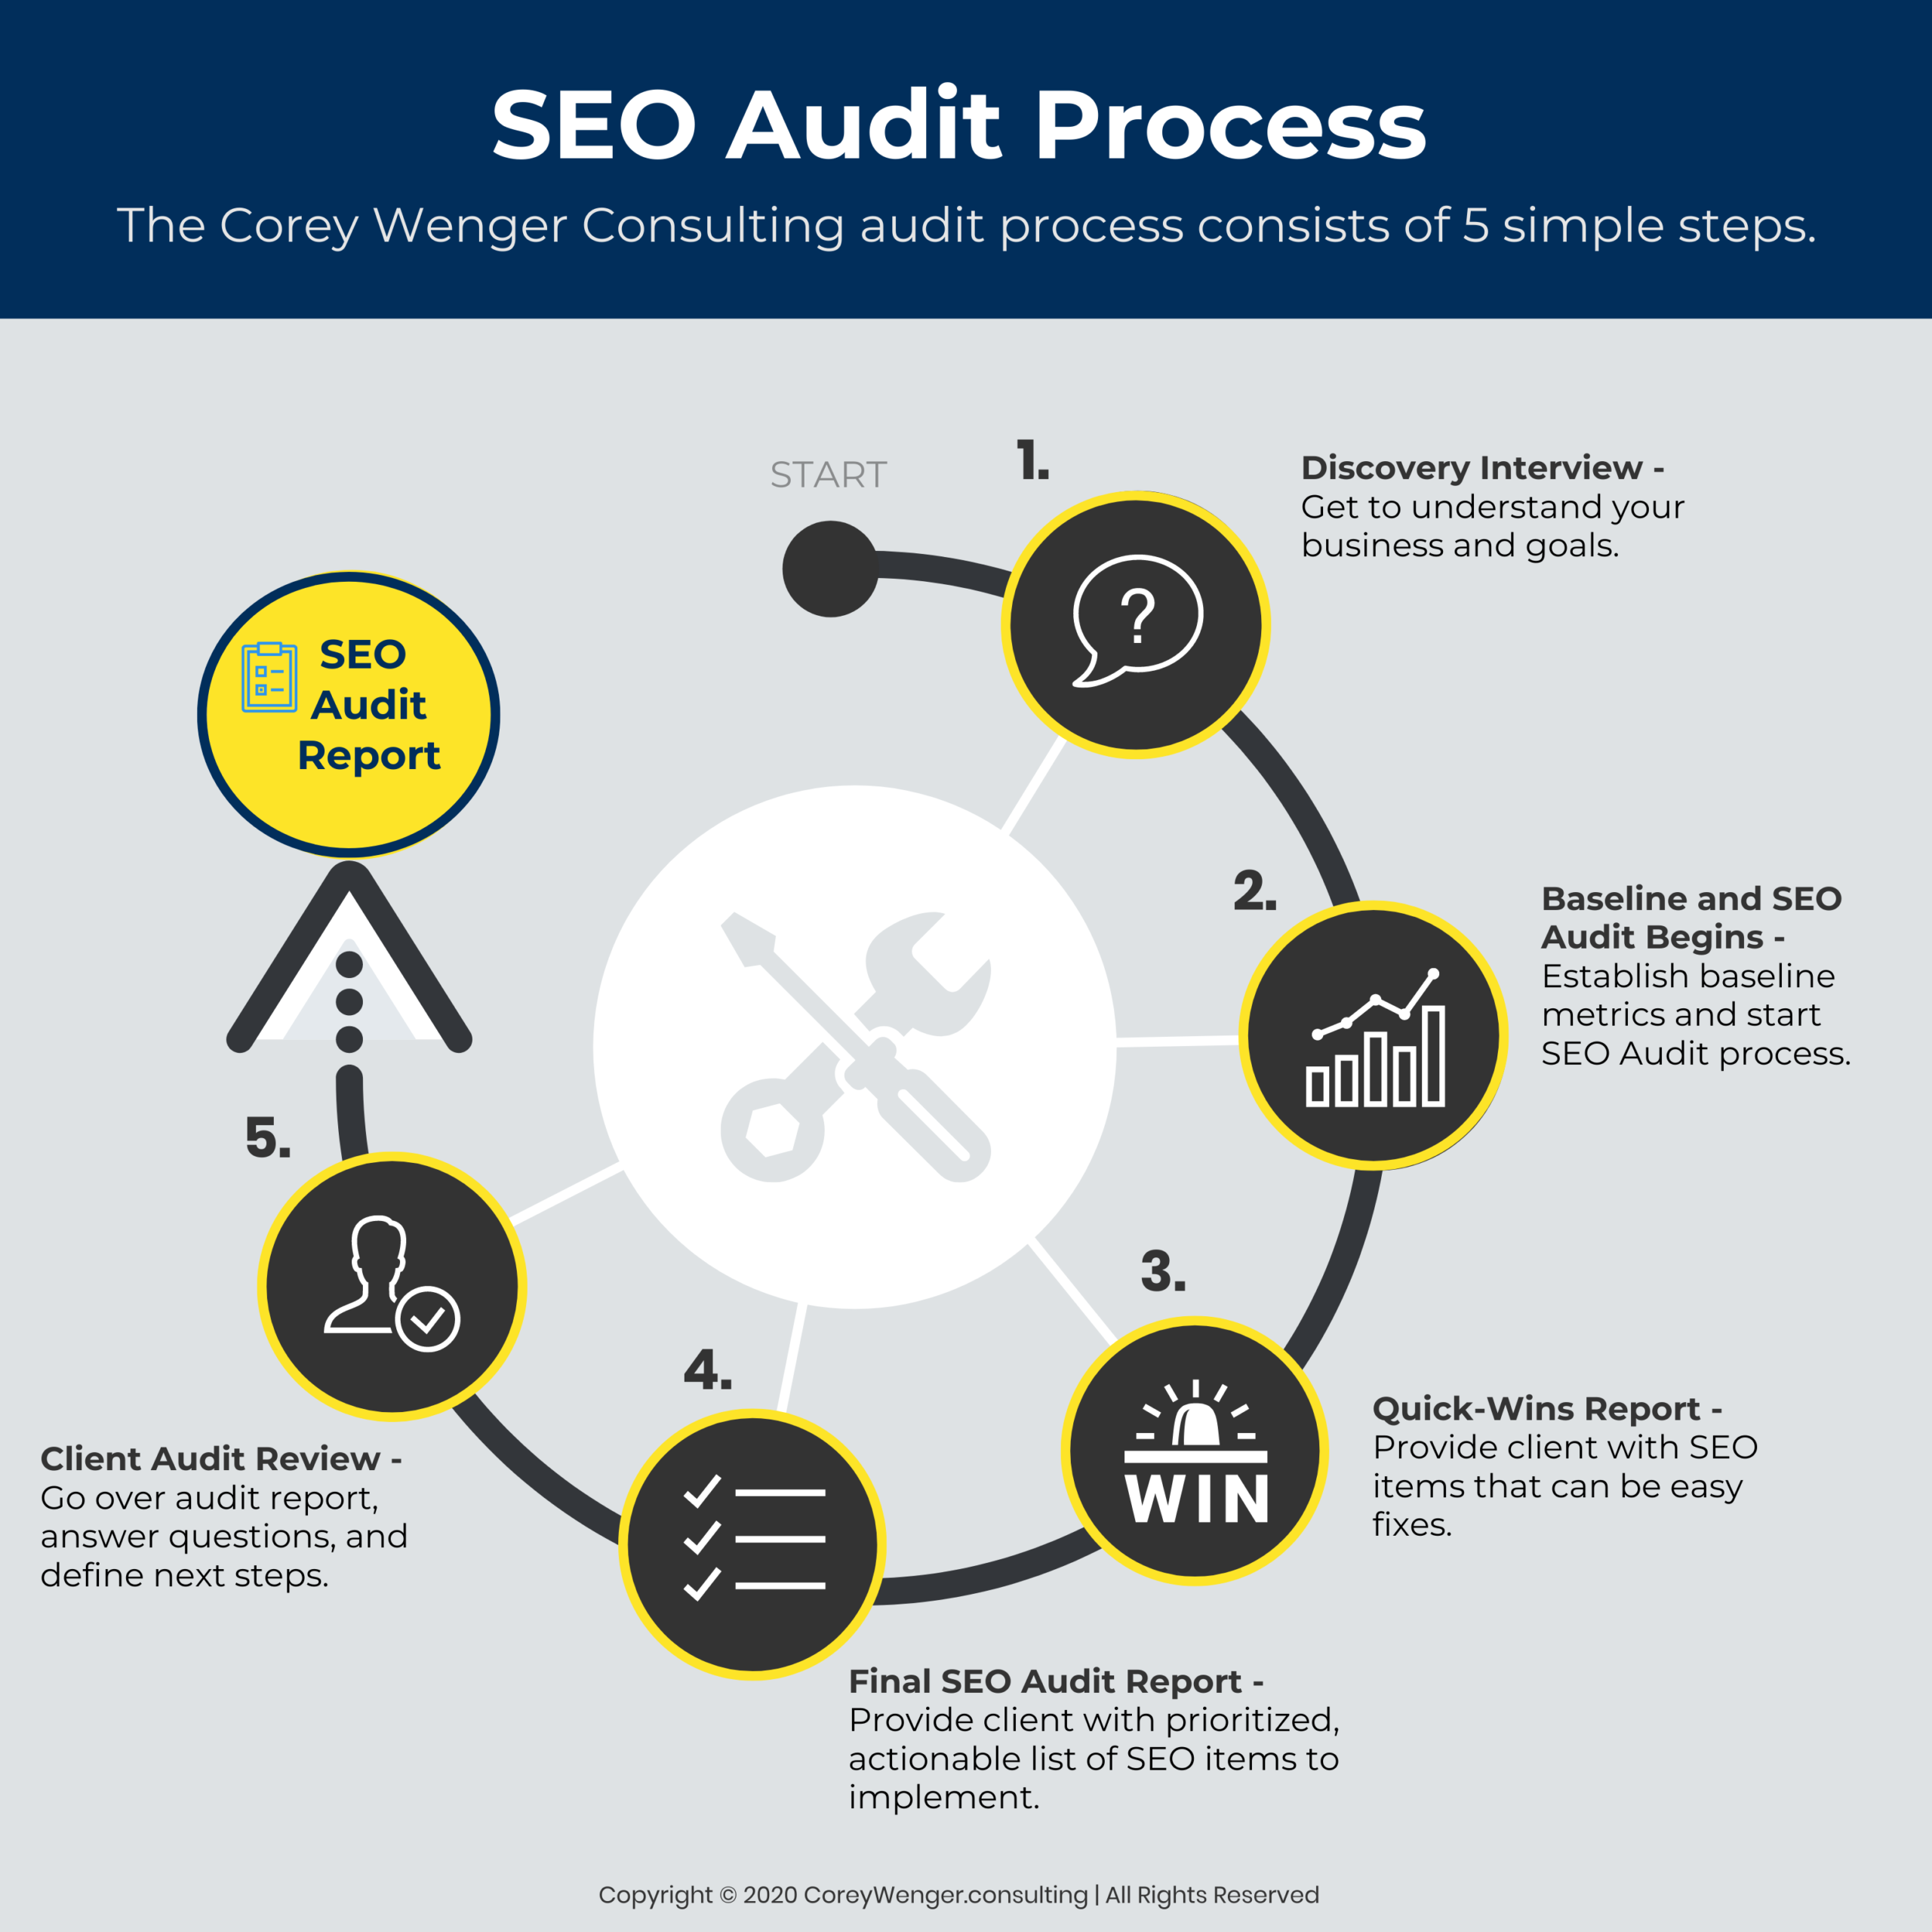 How to Create (and Complete) an SEO Audit Report - Free Template + Example